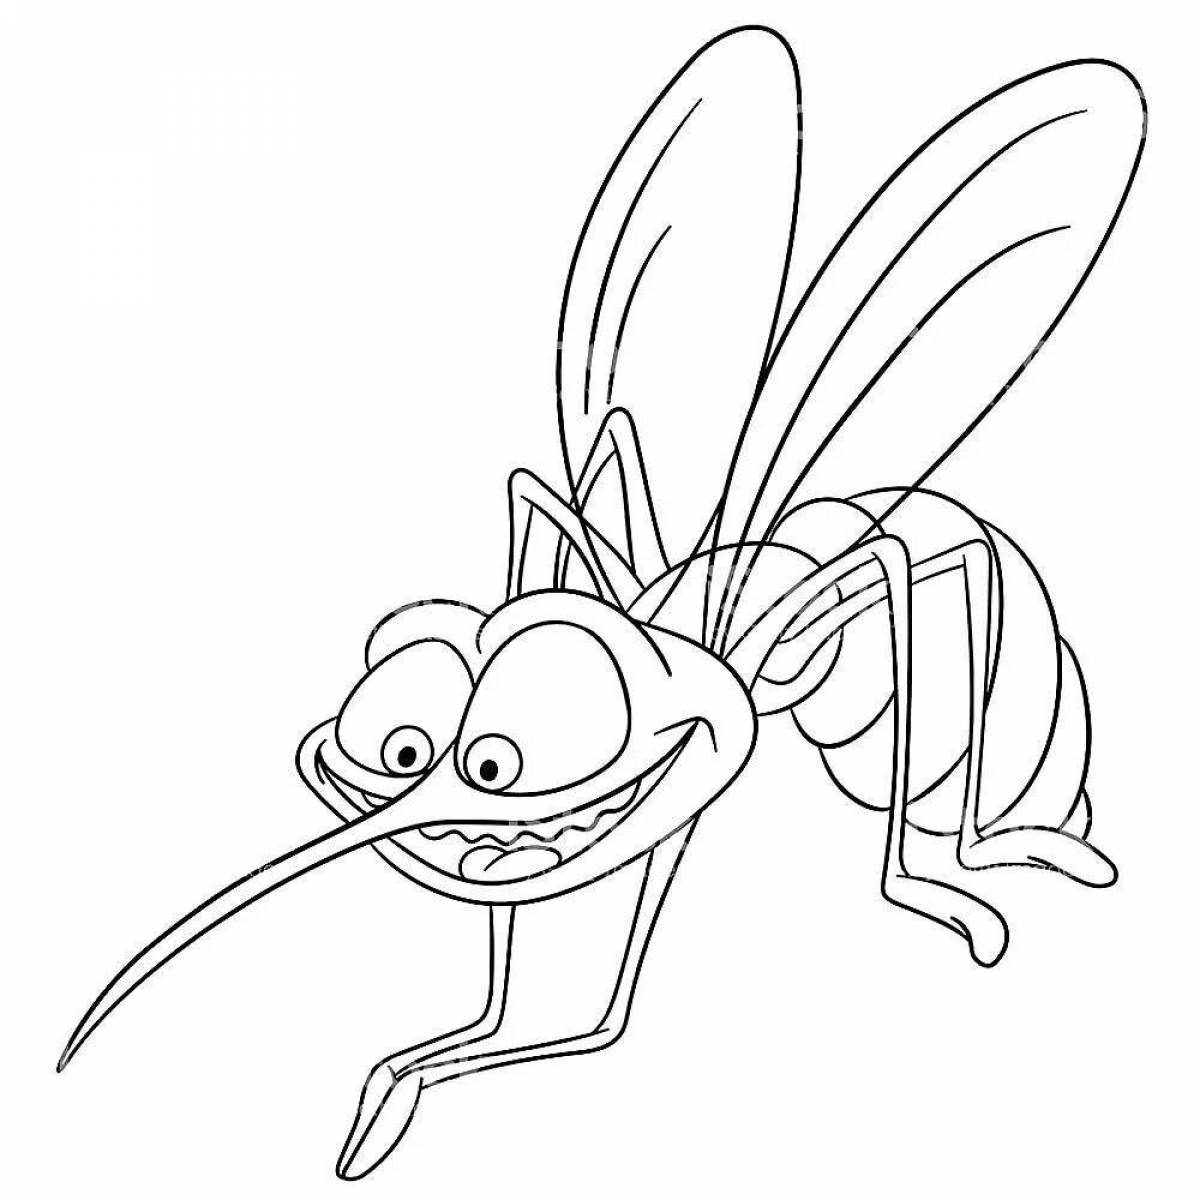 Adorable mosquito coloring page